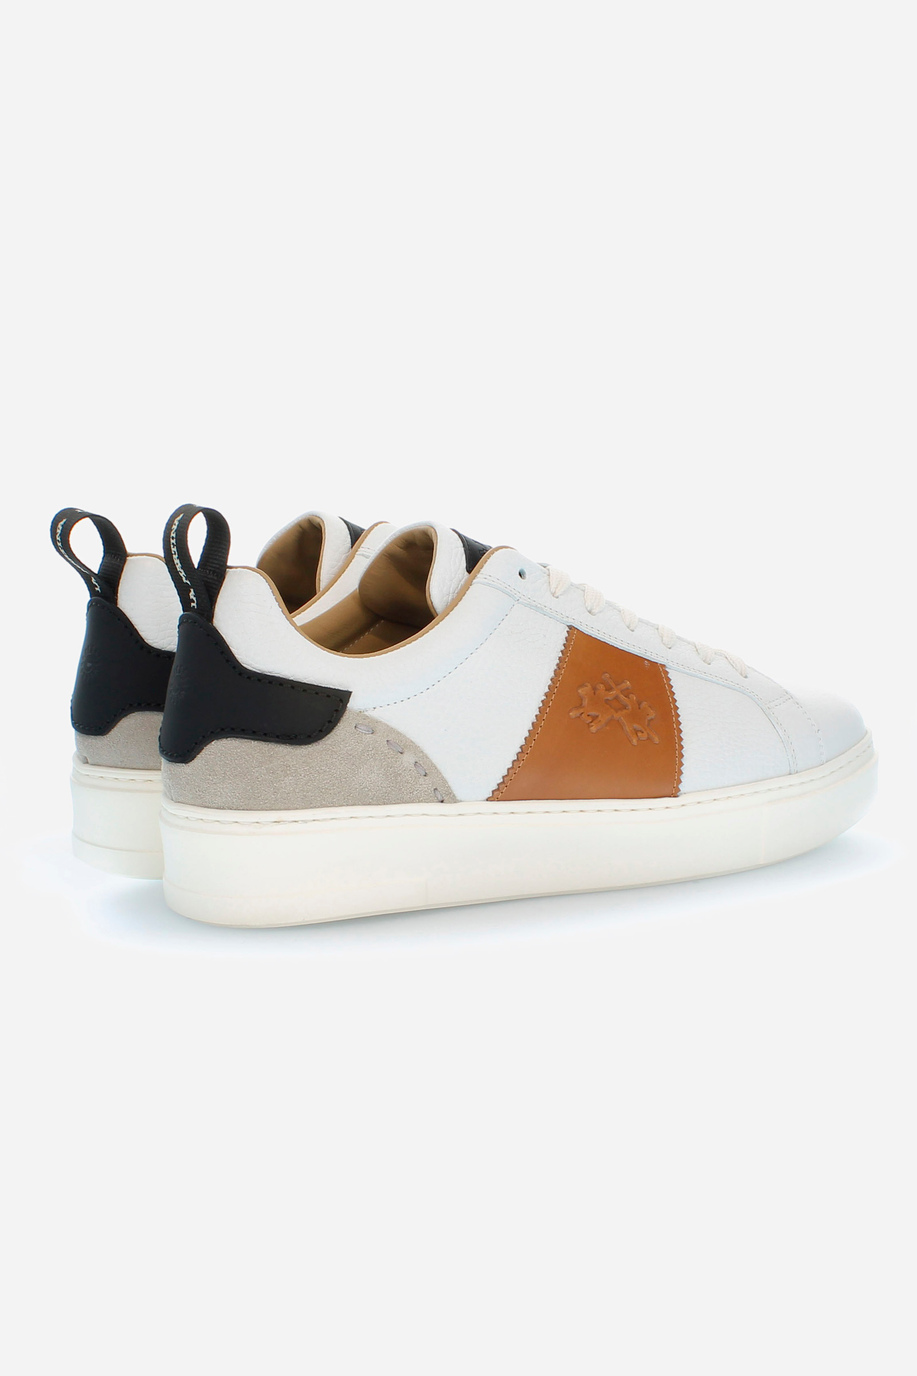 Men’s sneaker in a mix of calfskin and suede - Sneakers | La Martina - Official Online Shop